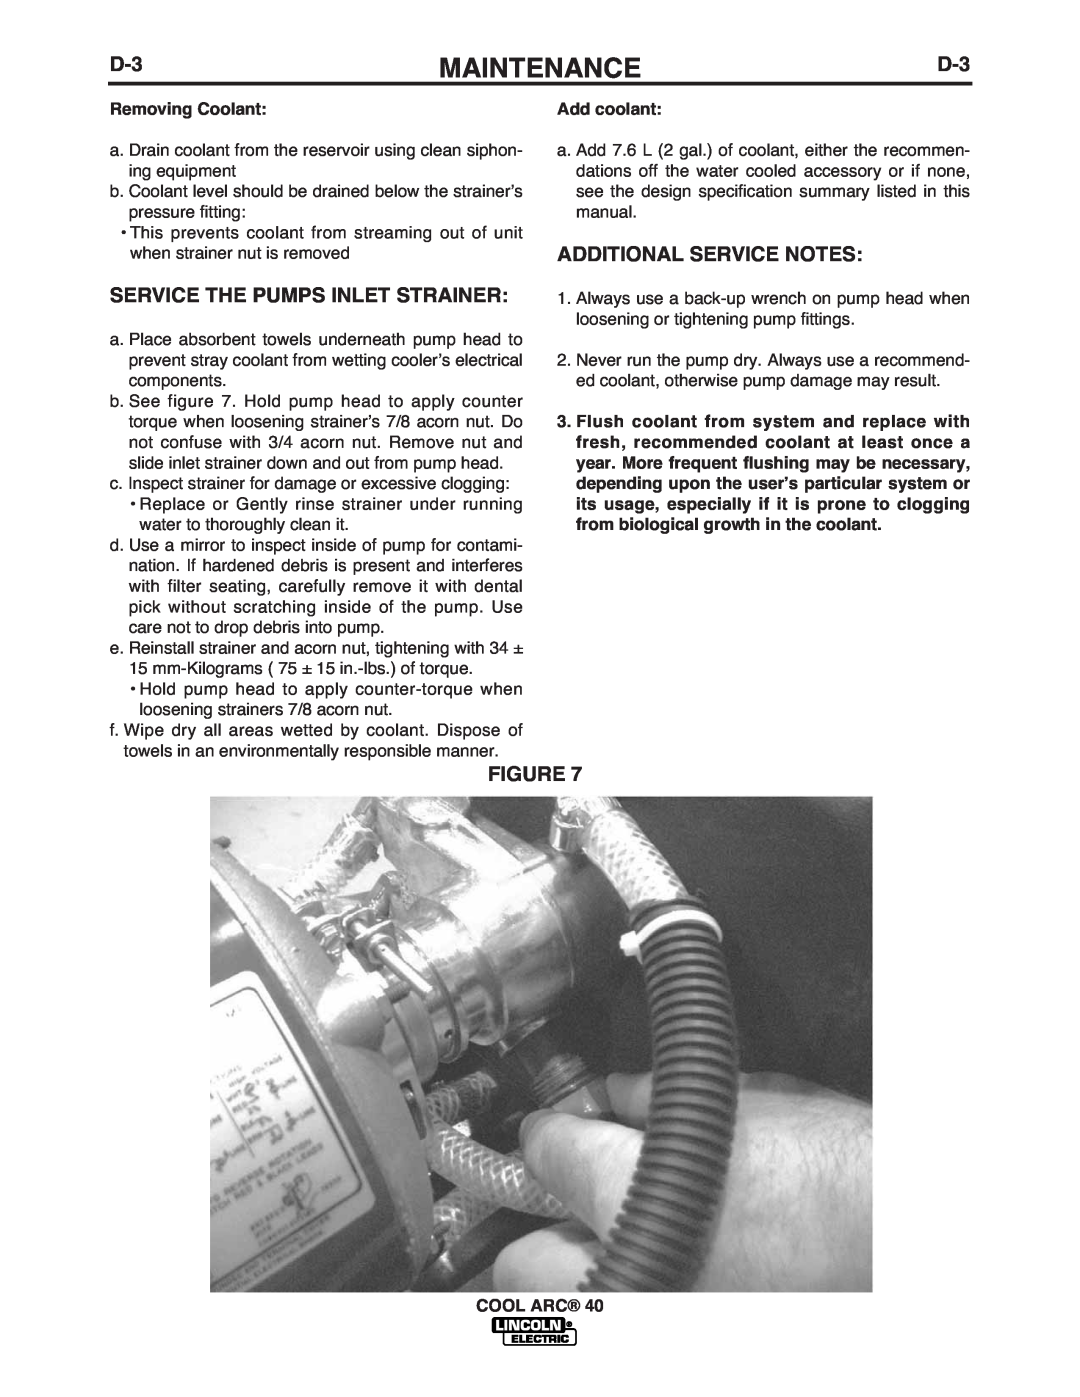 Lincoln Electric IM911 manual Maintenance, Removing Coolant, Add coolant, Cool Arc 